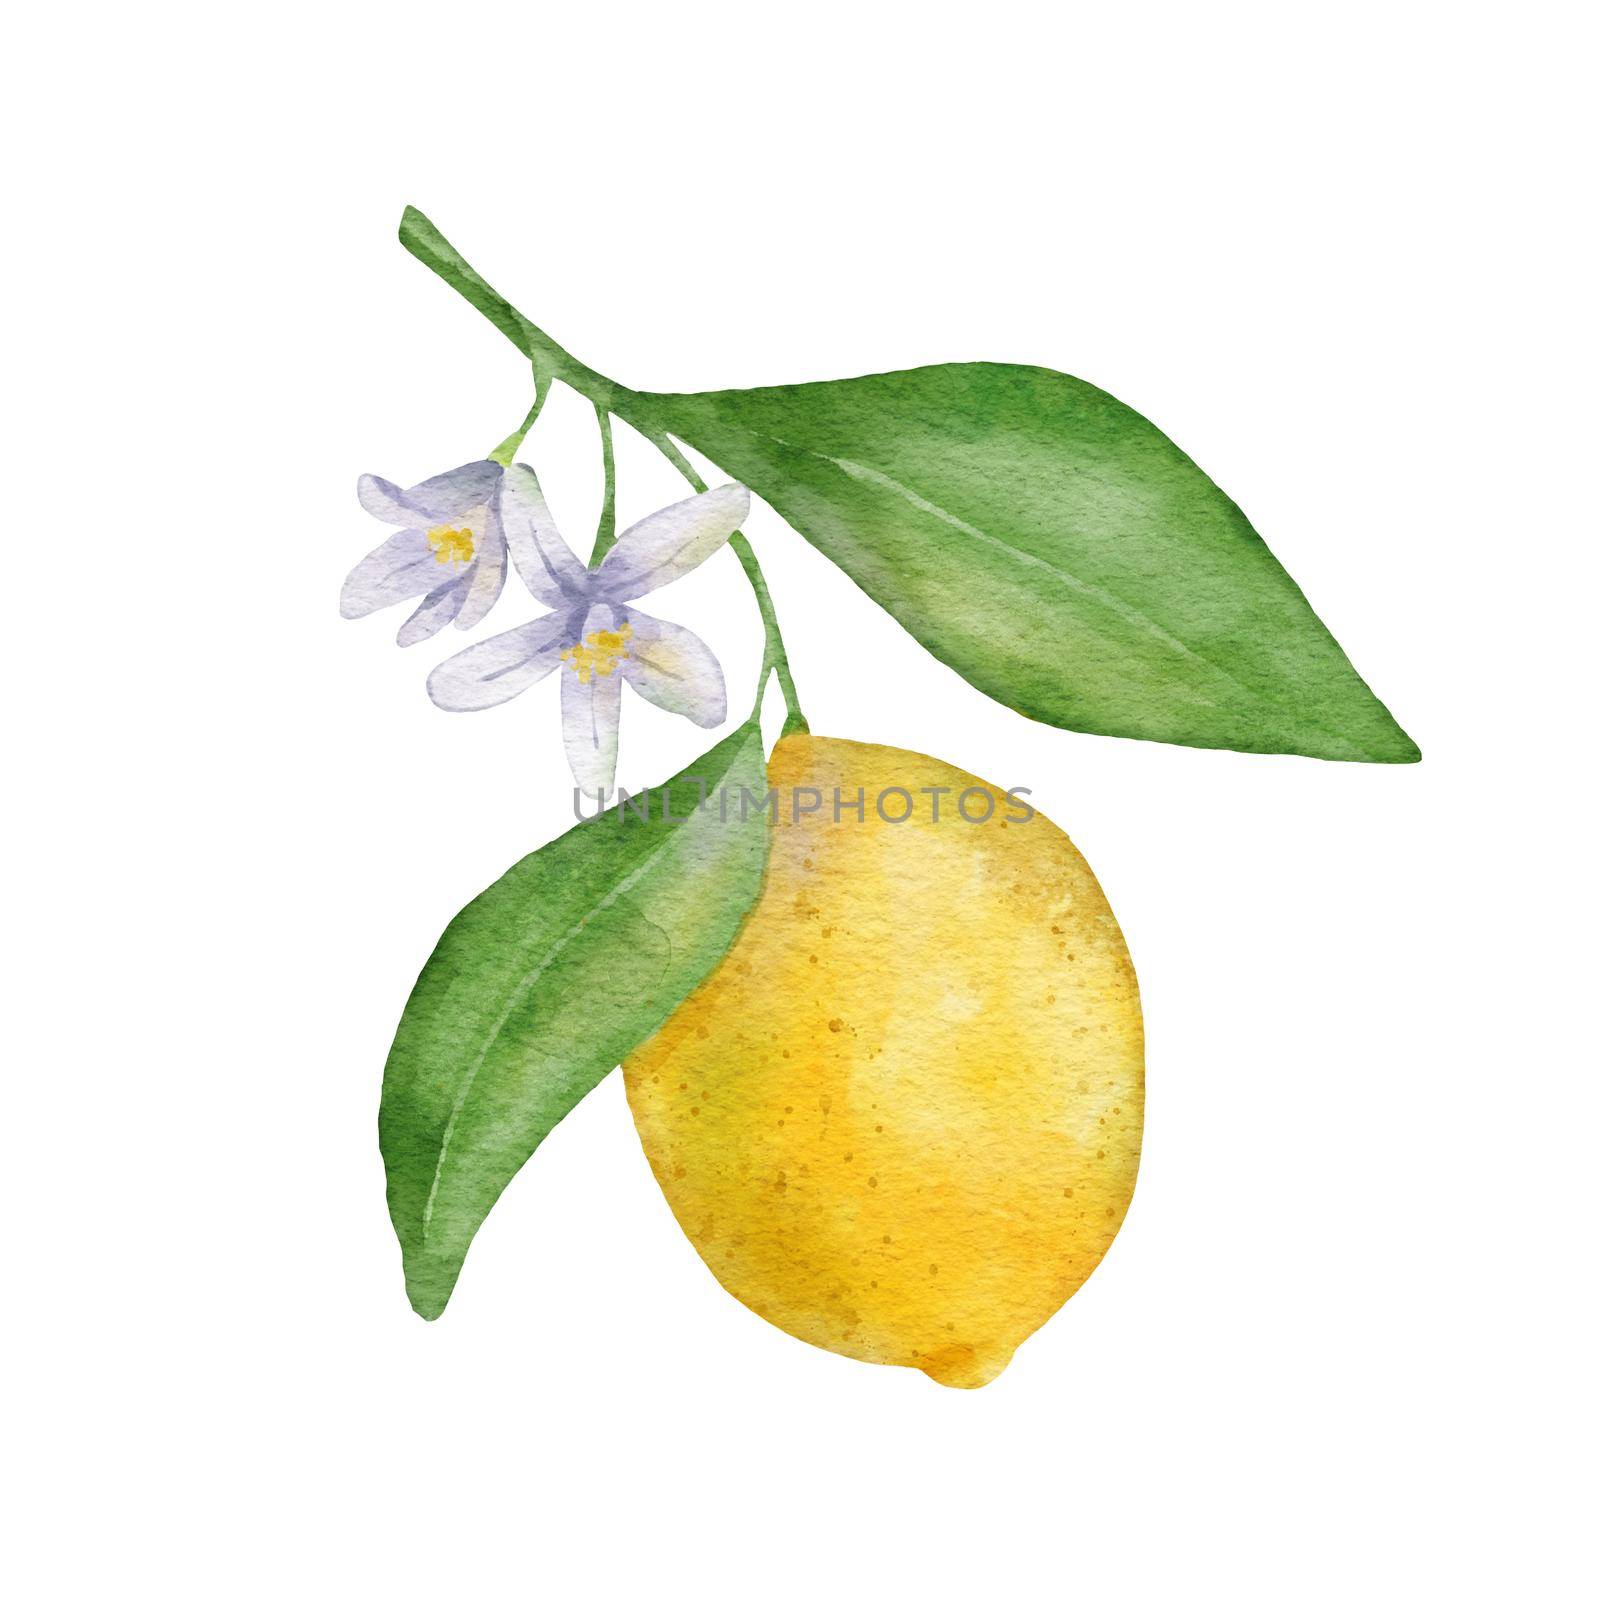 Lemon fruit with leaves and flower. Hand draw watercolor illustration isolated on white background by ElenaPlatova